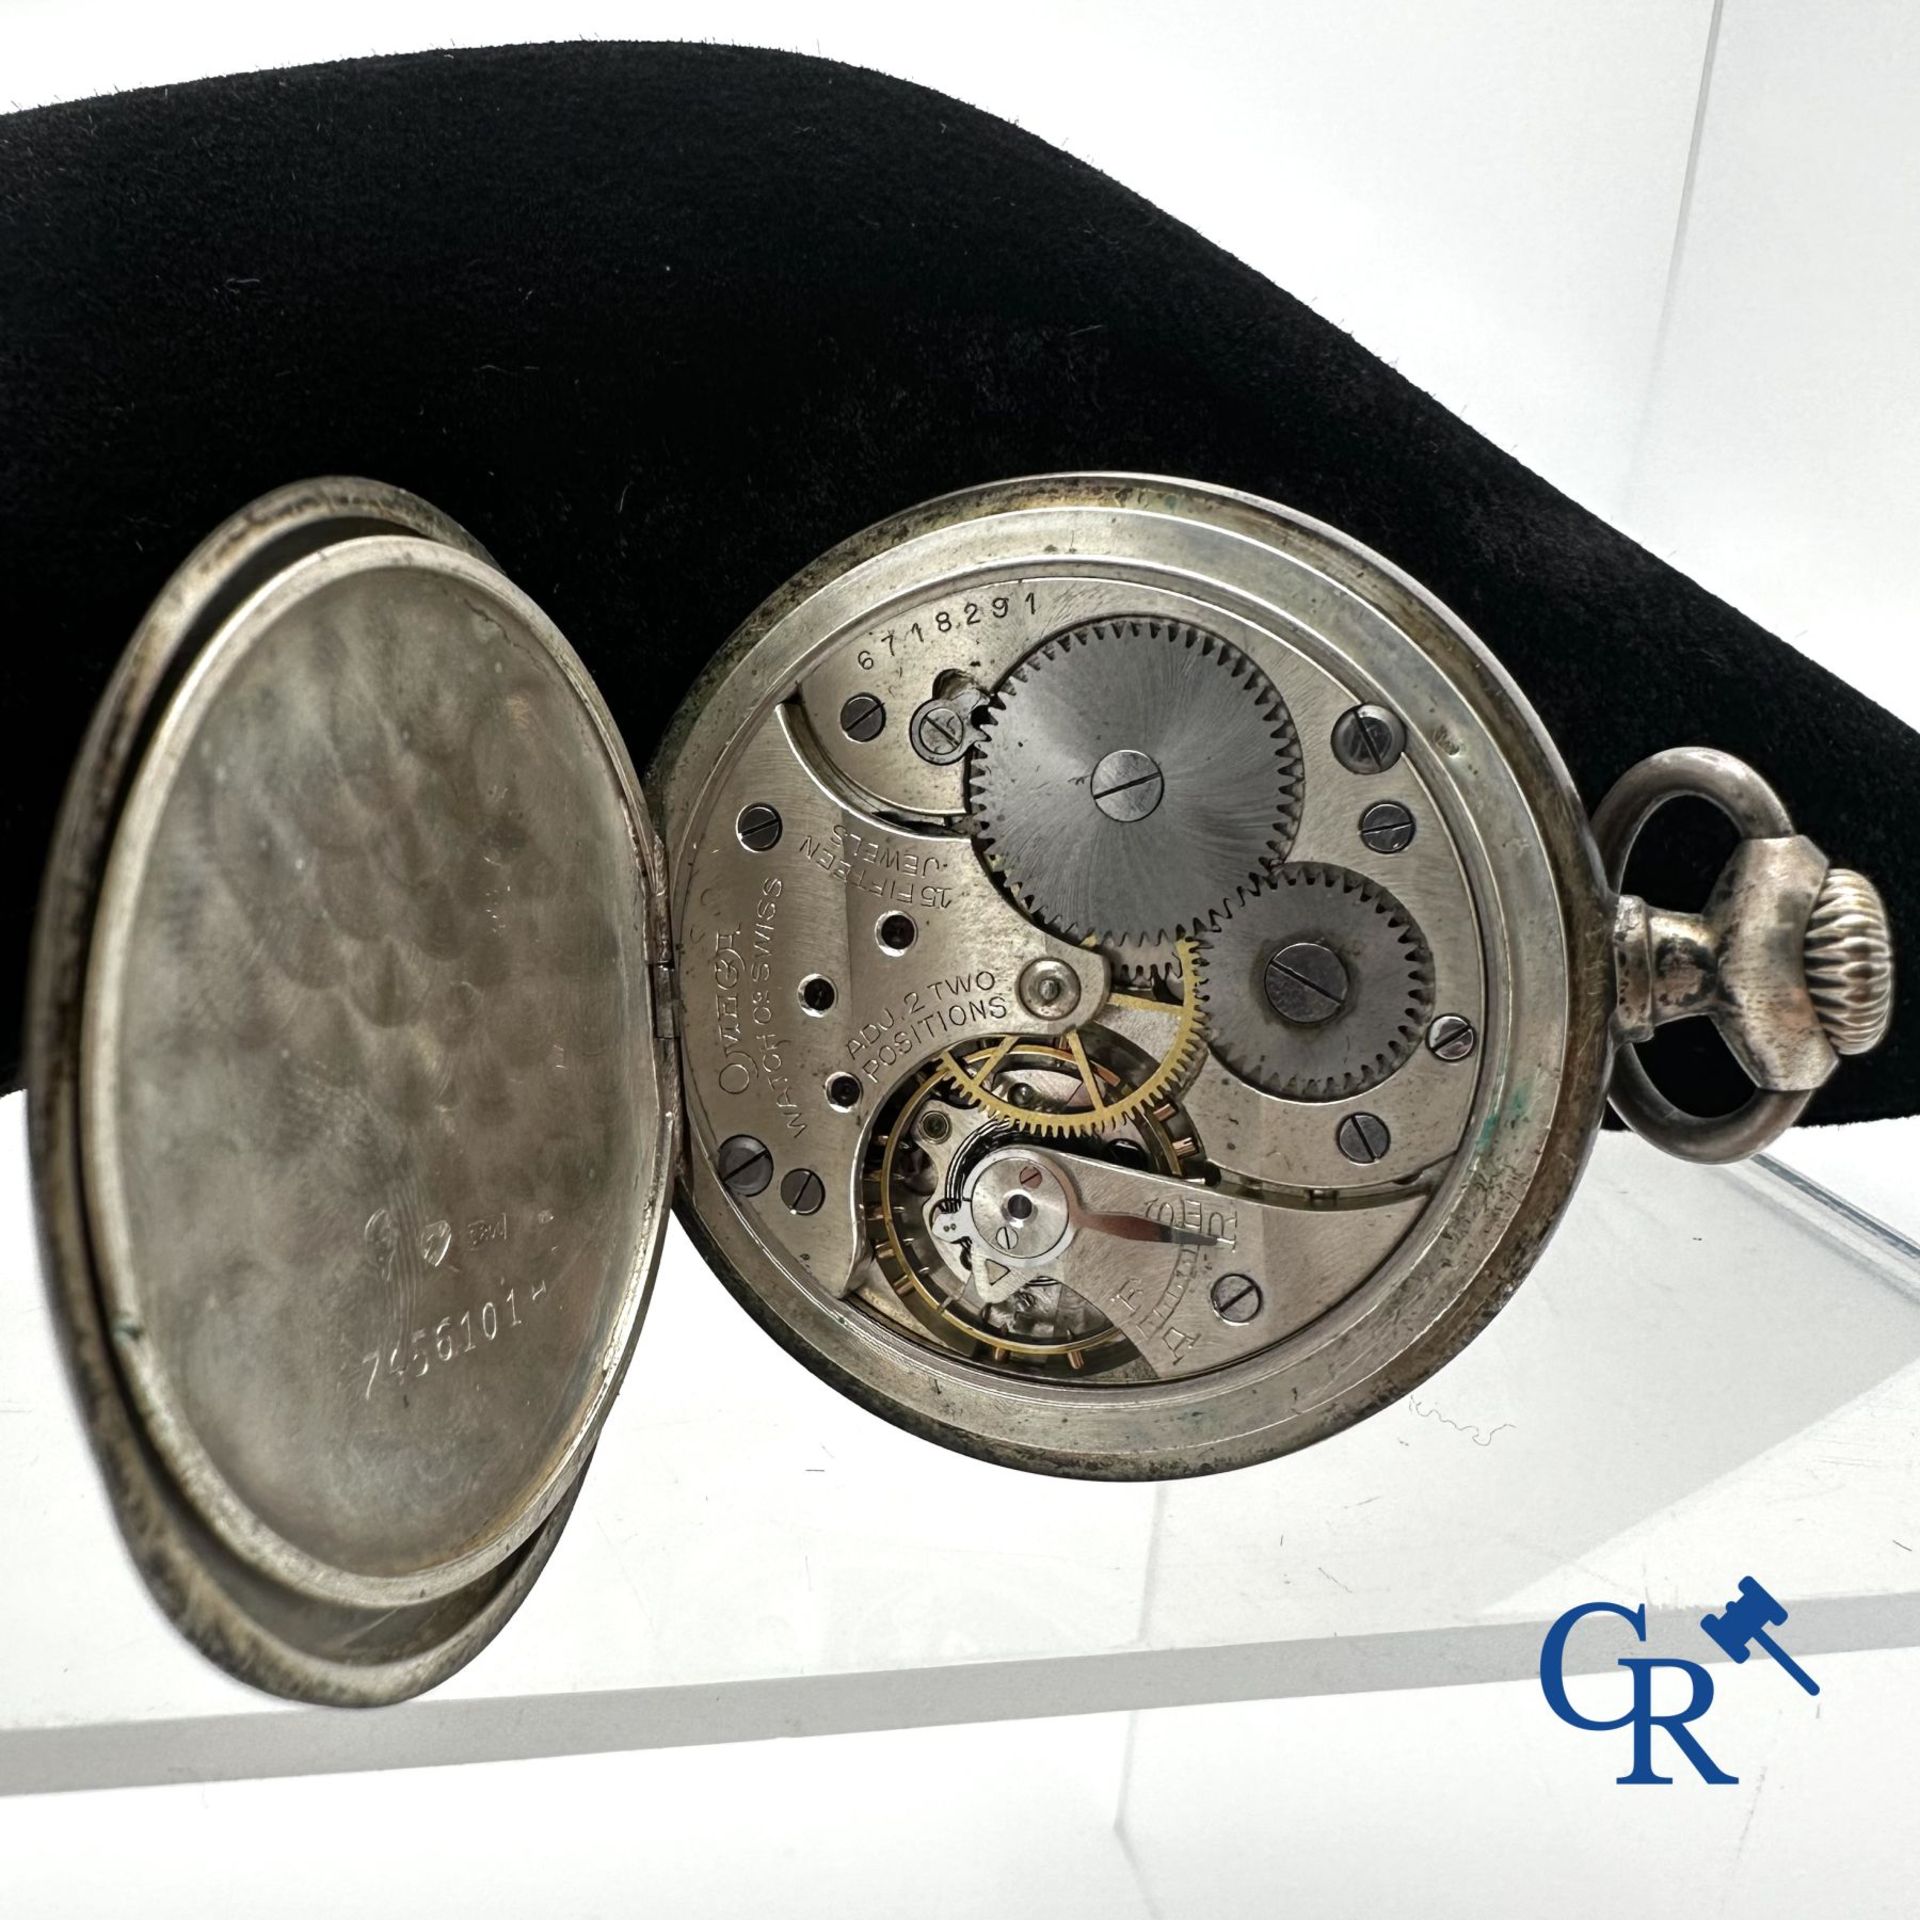 Timepieces: Oméga Genève: Lot consisting of 2 pocket watches. - Image 4 of 5